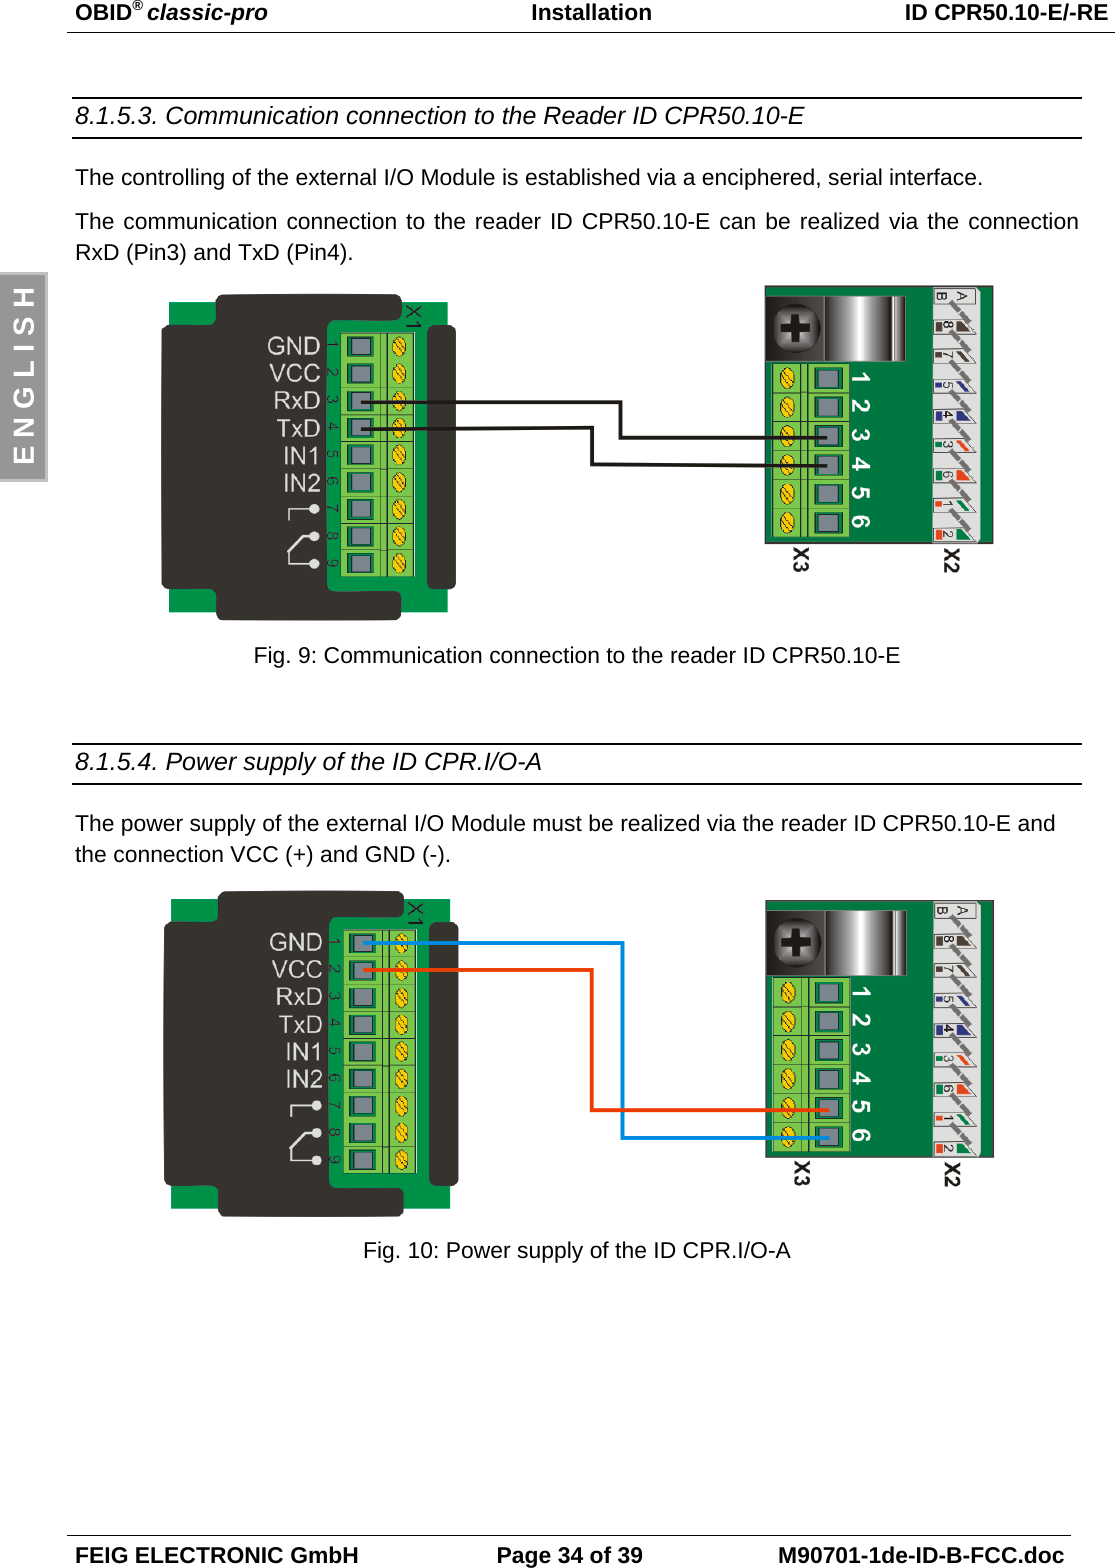 OBID® classic-pro Installation ID CPR50.10-E/-REFEIG ELECTRONIC GmbH Page 34 of 39 M90701-1de-ID-B-FCC.docE N G L I S H8.1.5.3. Communication connection to the Reader ID CPR50.10-EThe controlling of the external I/O Module is established via a enciphered, serial interface.The communication connection to the reader ID CPR50.10-E can be realized via the connectionRxD (Pin3) and TxD (Pin4).Fig. 9: Communication connection to the reader ID CPR50.10-E8.1.5.4. Power supply of the ID CPR.I/O-AThe power supply of the external I/O Module must be realized via the reader ID CPR50.10-E andthe connection VCC (+) and GND (-).Fig. 10: Power supply of the ID CPR.I/O-A